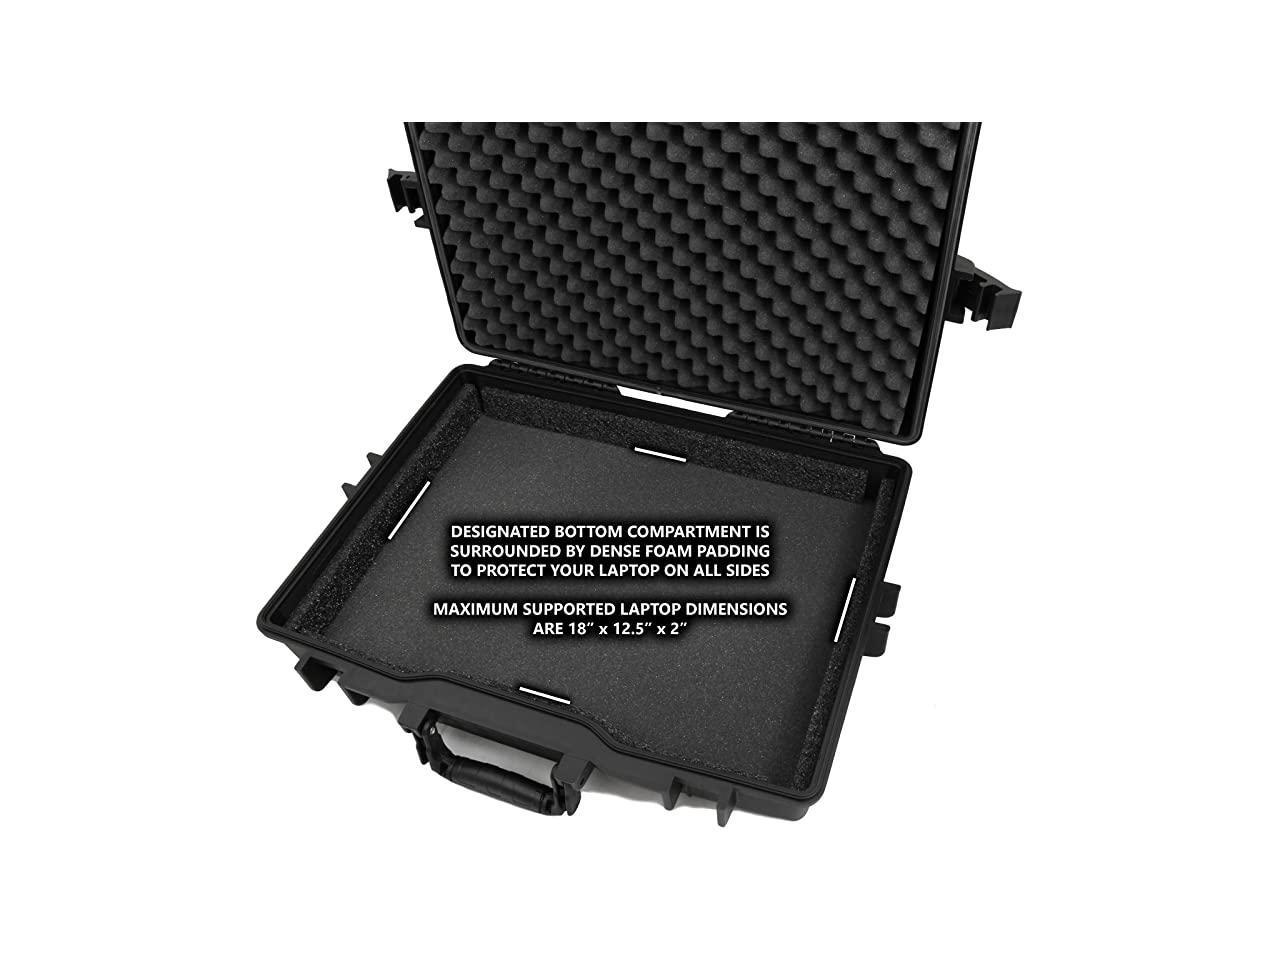 Lenovo Casematix Waterproof Laptop Hard Case for 15-17 inch Gaming Laptops and Accessories Razer MSI Rugged Heavy Duty Laptop Case for 15.6 and 17.3 inch Alienware Acer Asus Dell Notebook 